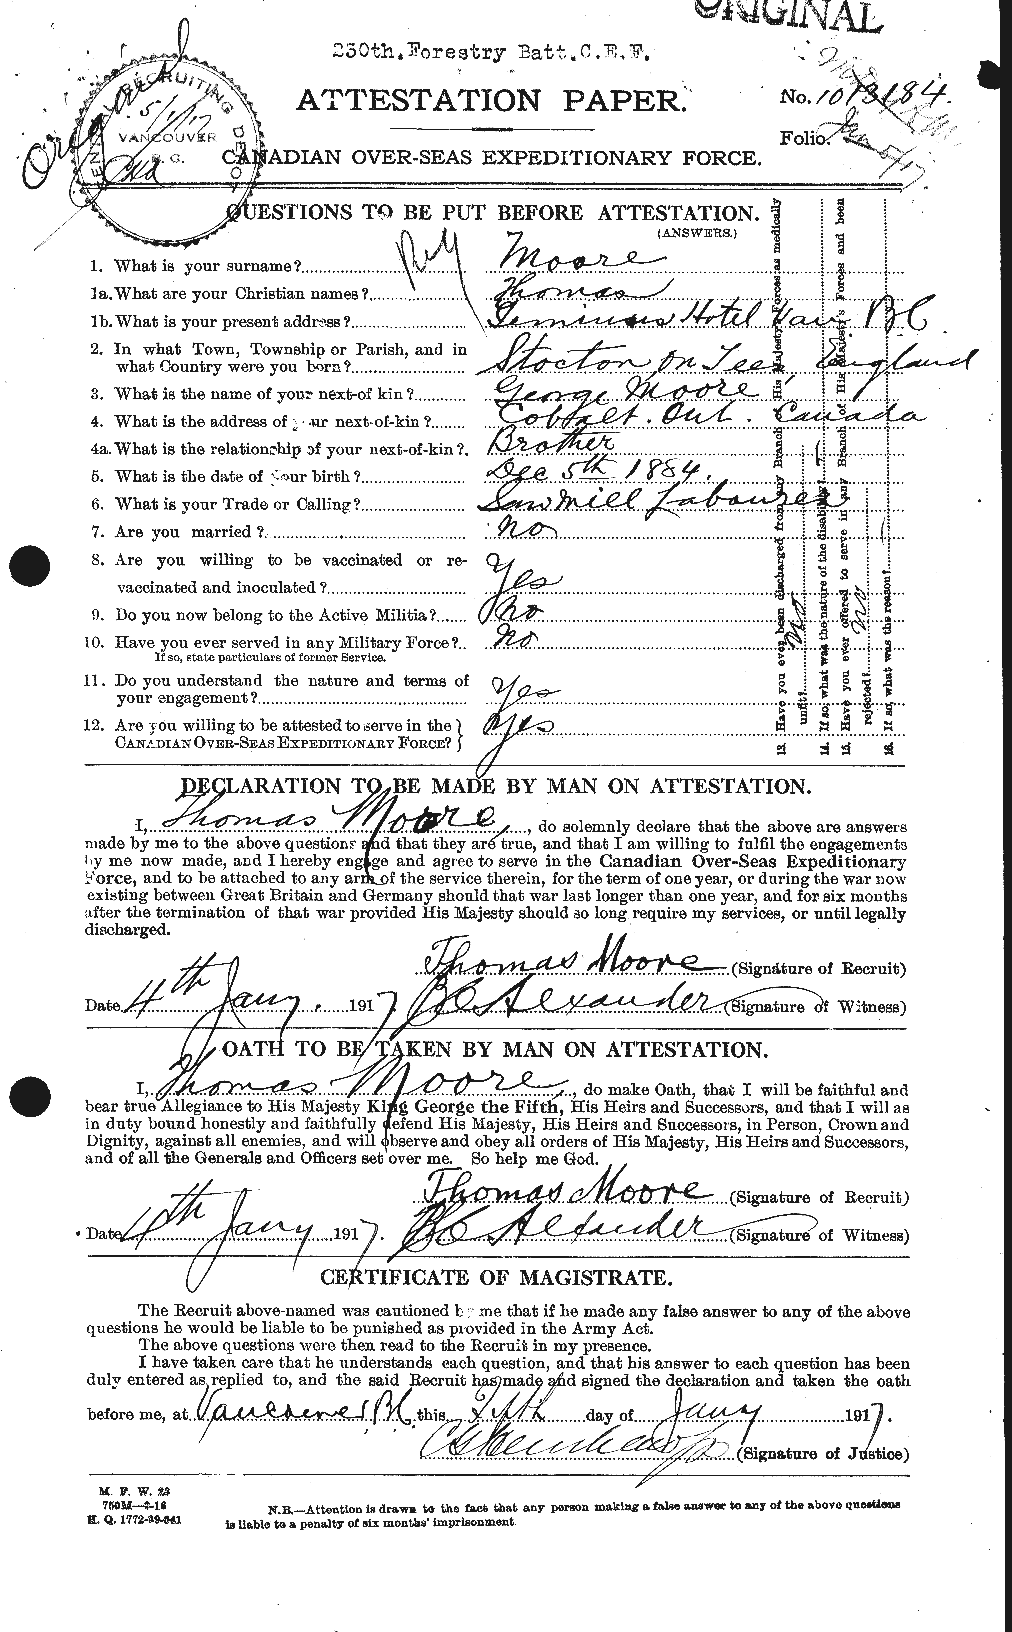 Personnel Records of the First World War - CEF 505609a